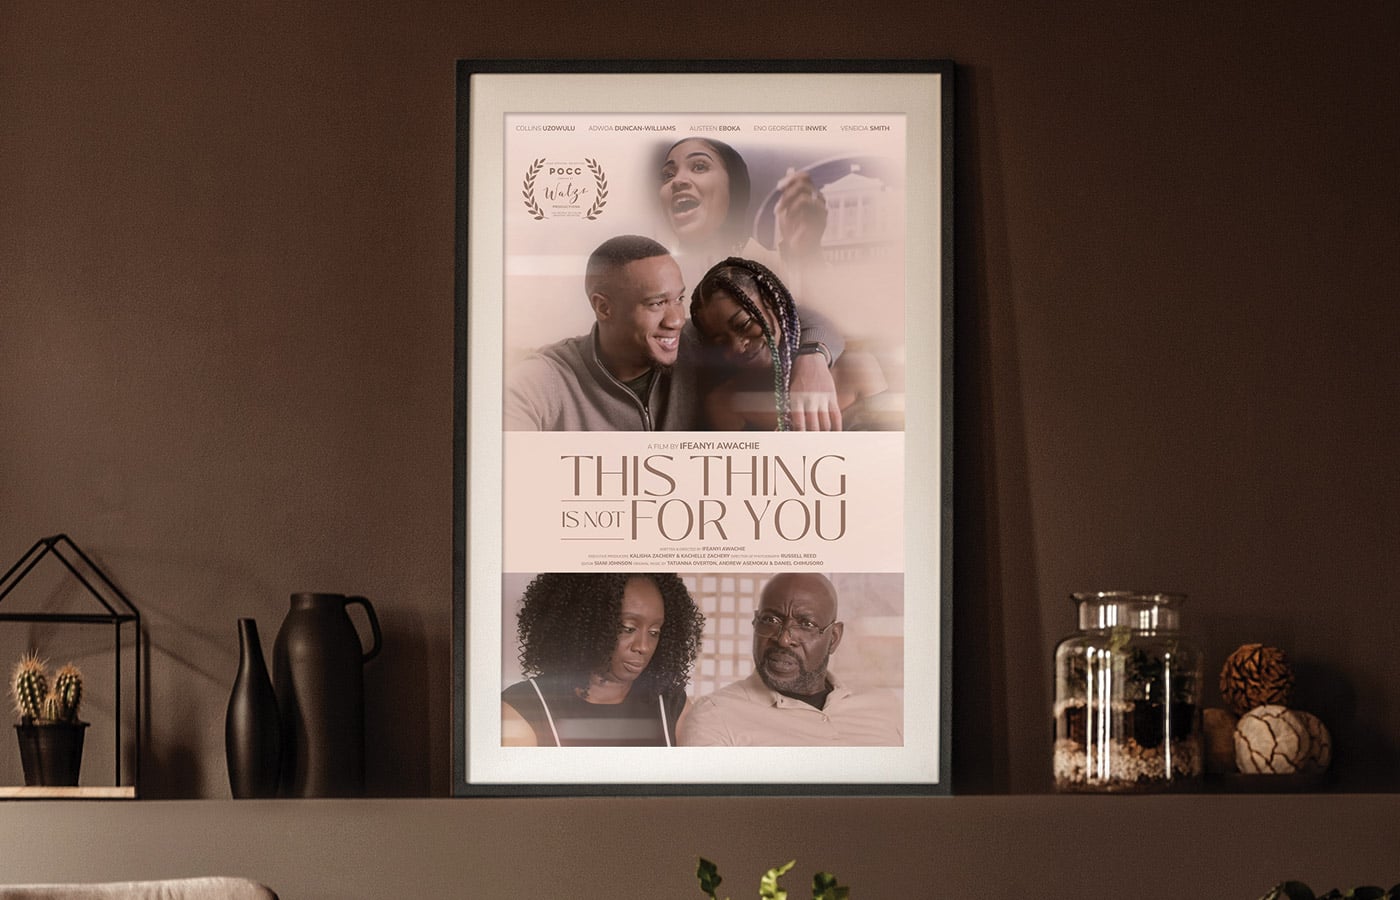 This Thing Is Not For You poster framed in a living room setting.